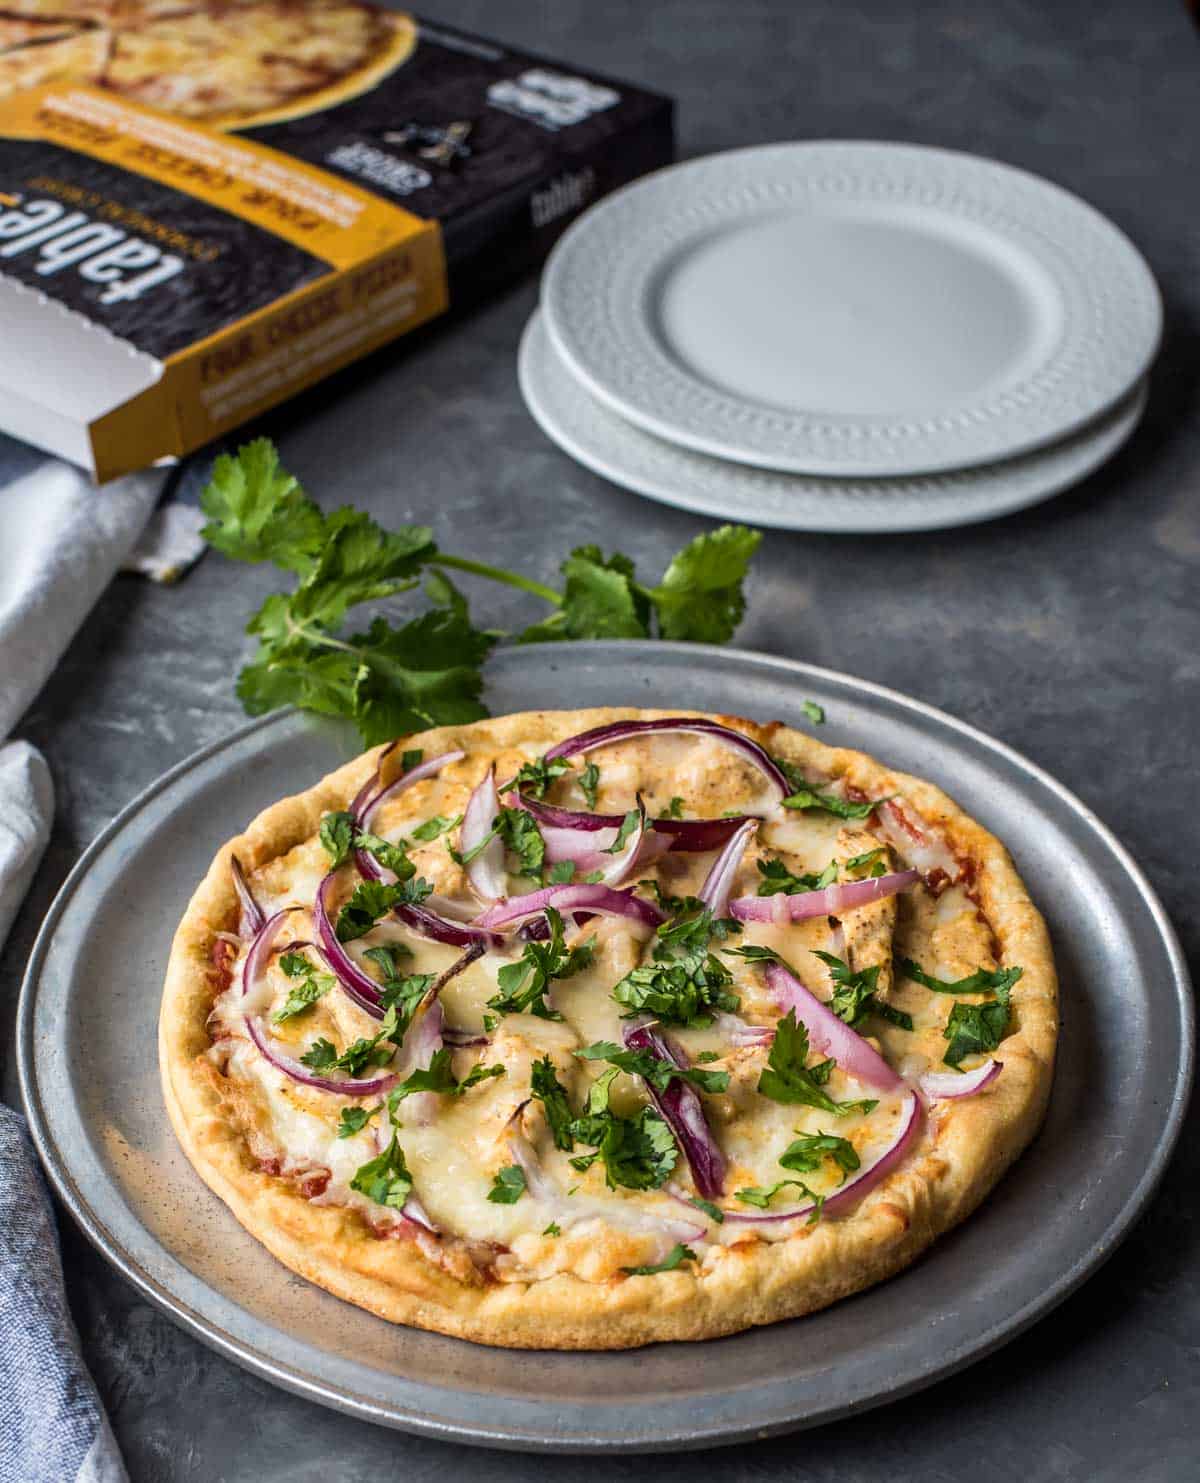 Chicken tikka masala pizza is garnished with cilantro leaves and served in a pewter plate. An empty Table5 pizza package is lying next to it along with 2 white plates.